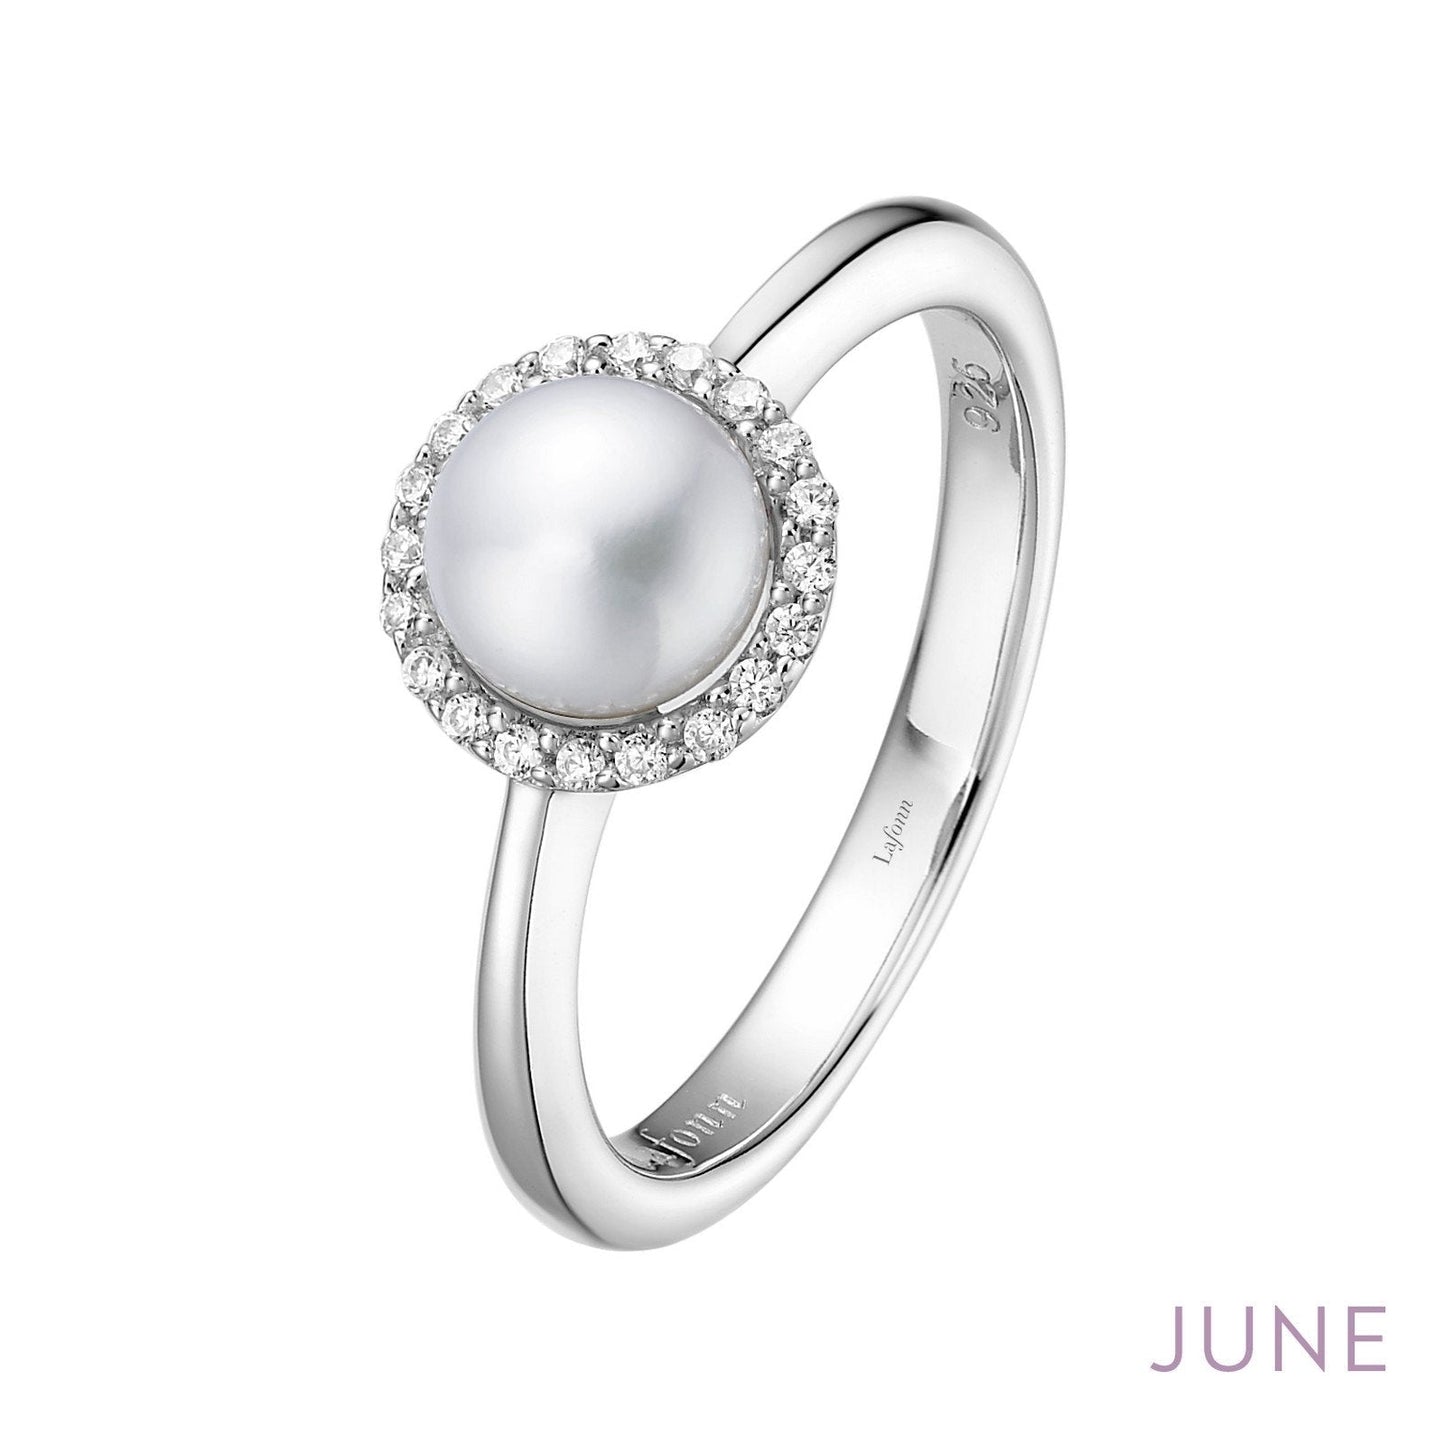 Lafonn June Birthstone Ring JUNE RINGS Size 7 Platinum Cultured Freshwater Pearl: 6mm.   Lassaire simulated diamonds: 0.20 cts. CTS 